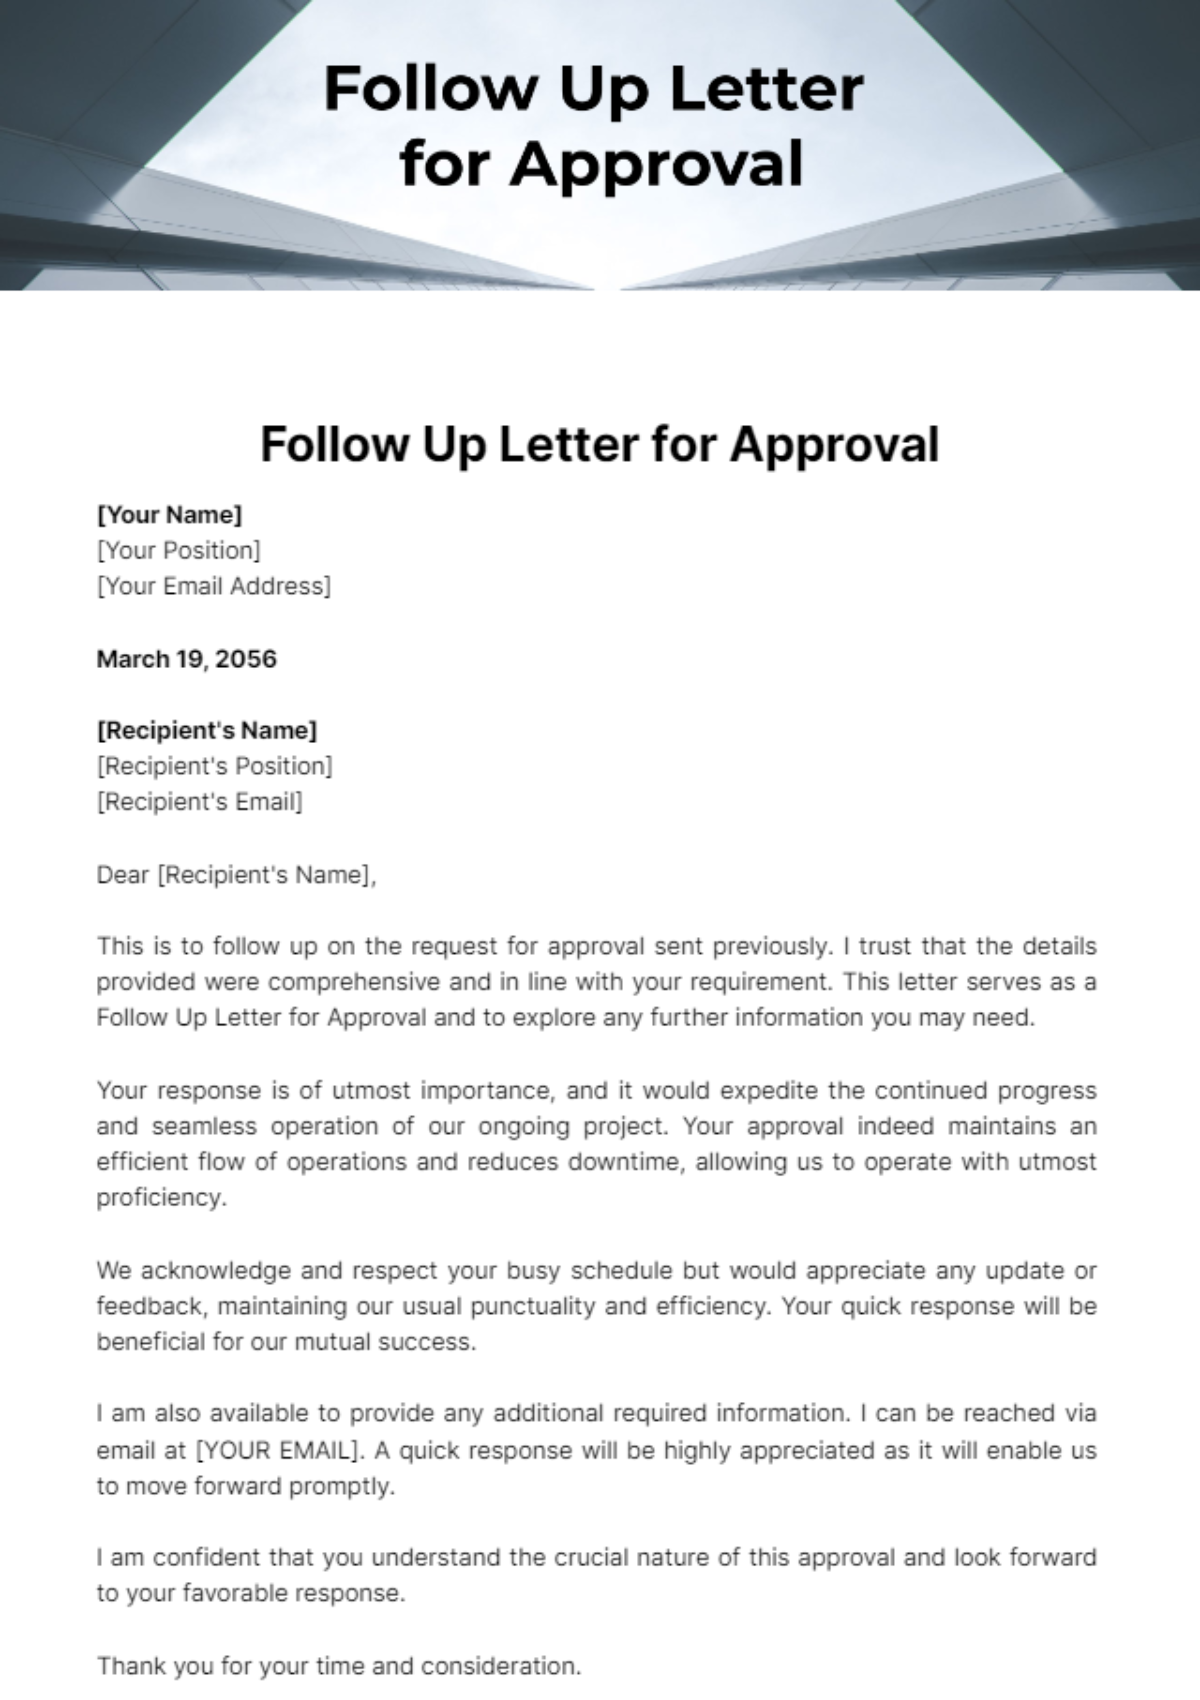 Free Follow Up Letter for Approval Template